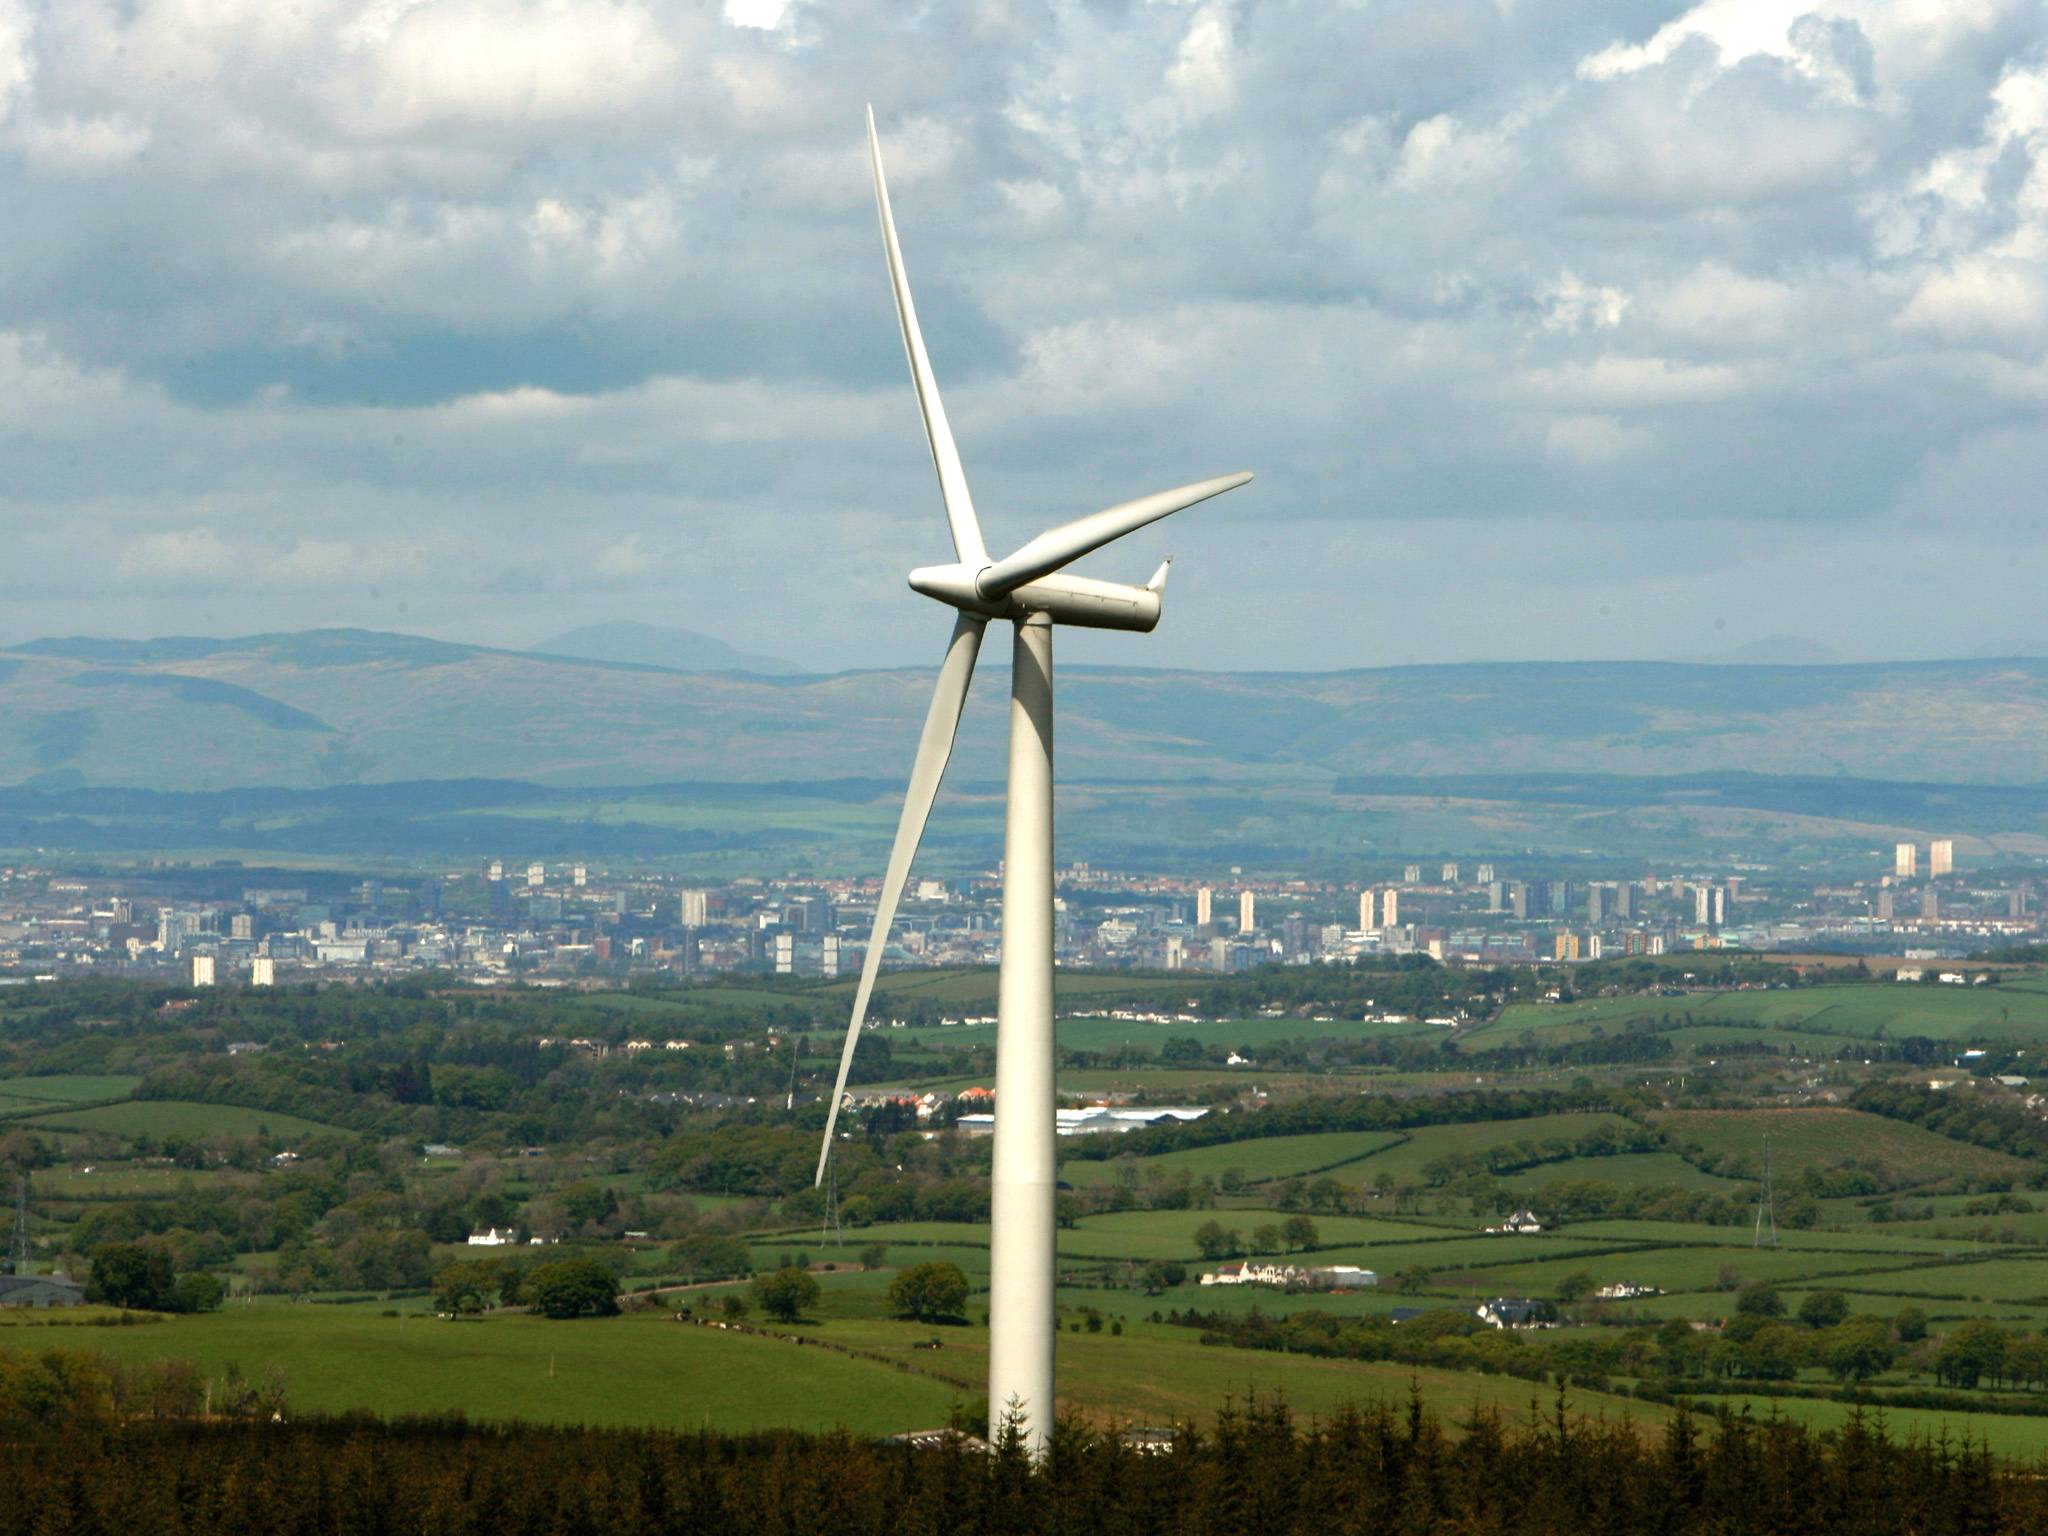 There are 4,417 turbines operating in the UK